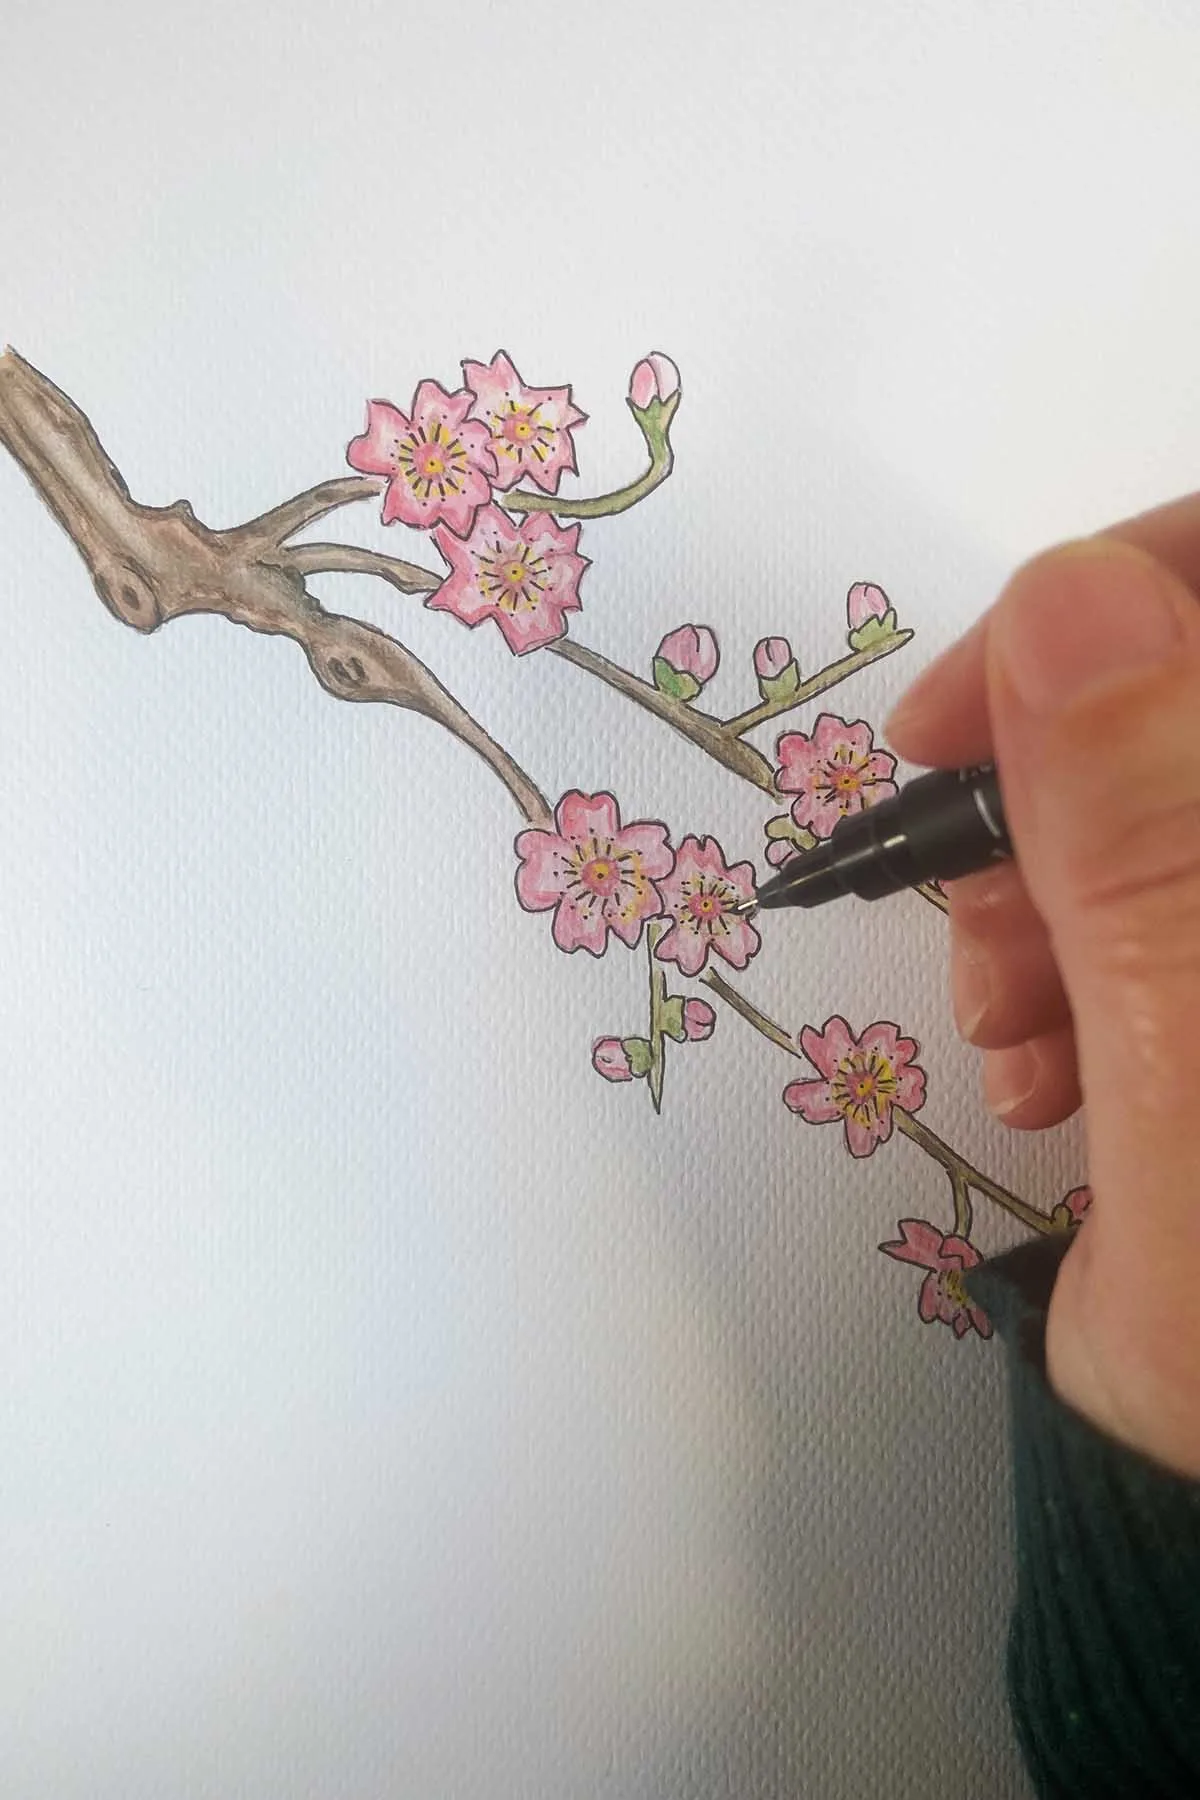 Adding fine lines to Cherry blossom drawing